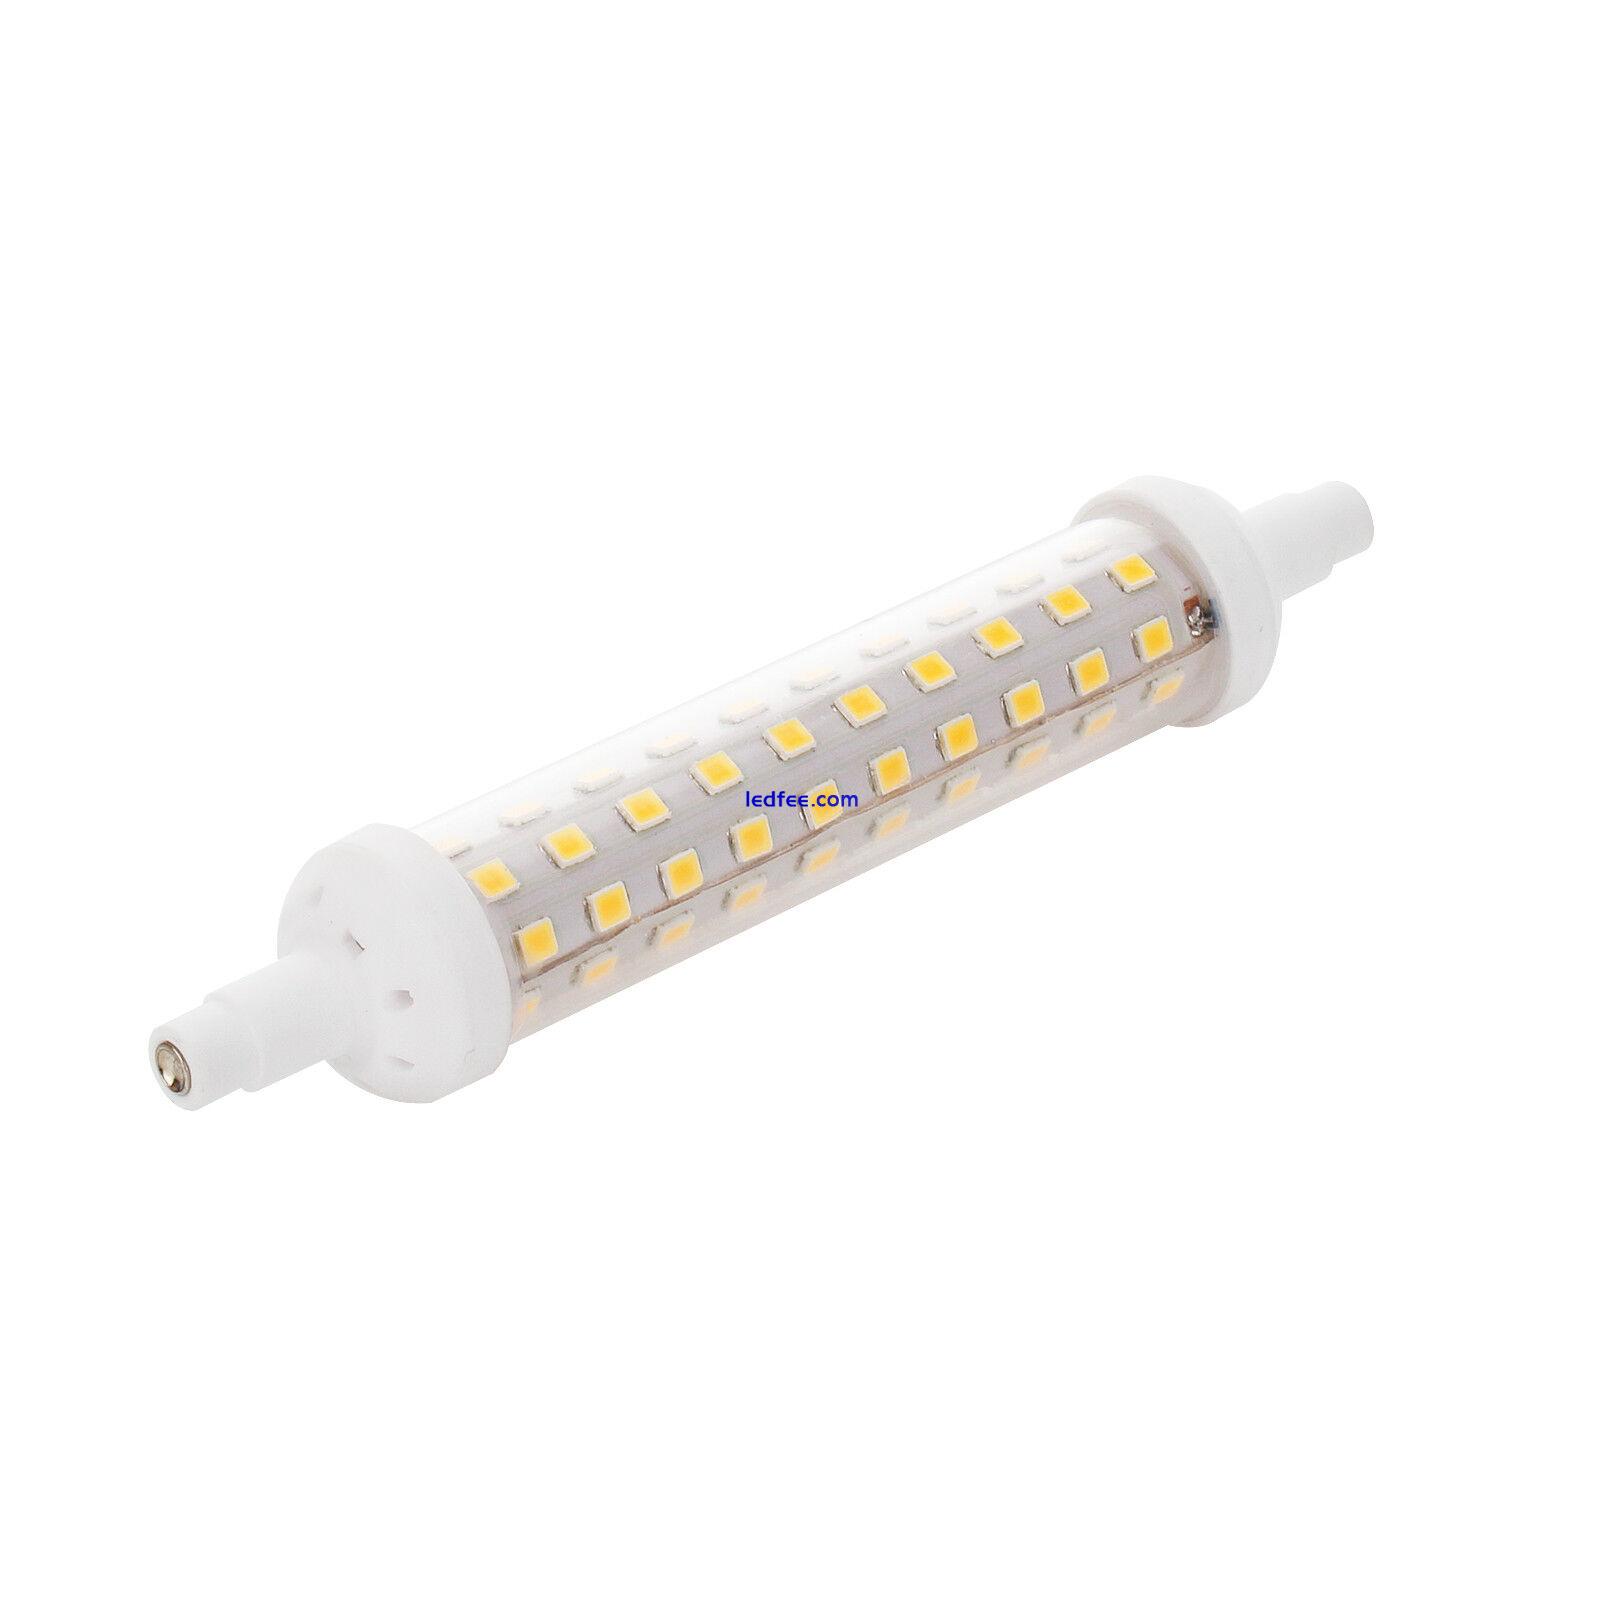 Dimmable R7s 10W 15W 20W 2835 SMD LED Light Replace Halogen Lamp Floodlight 220V 2 